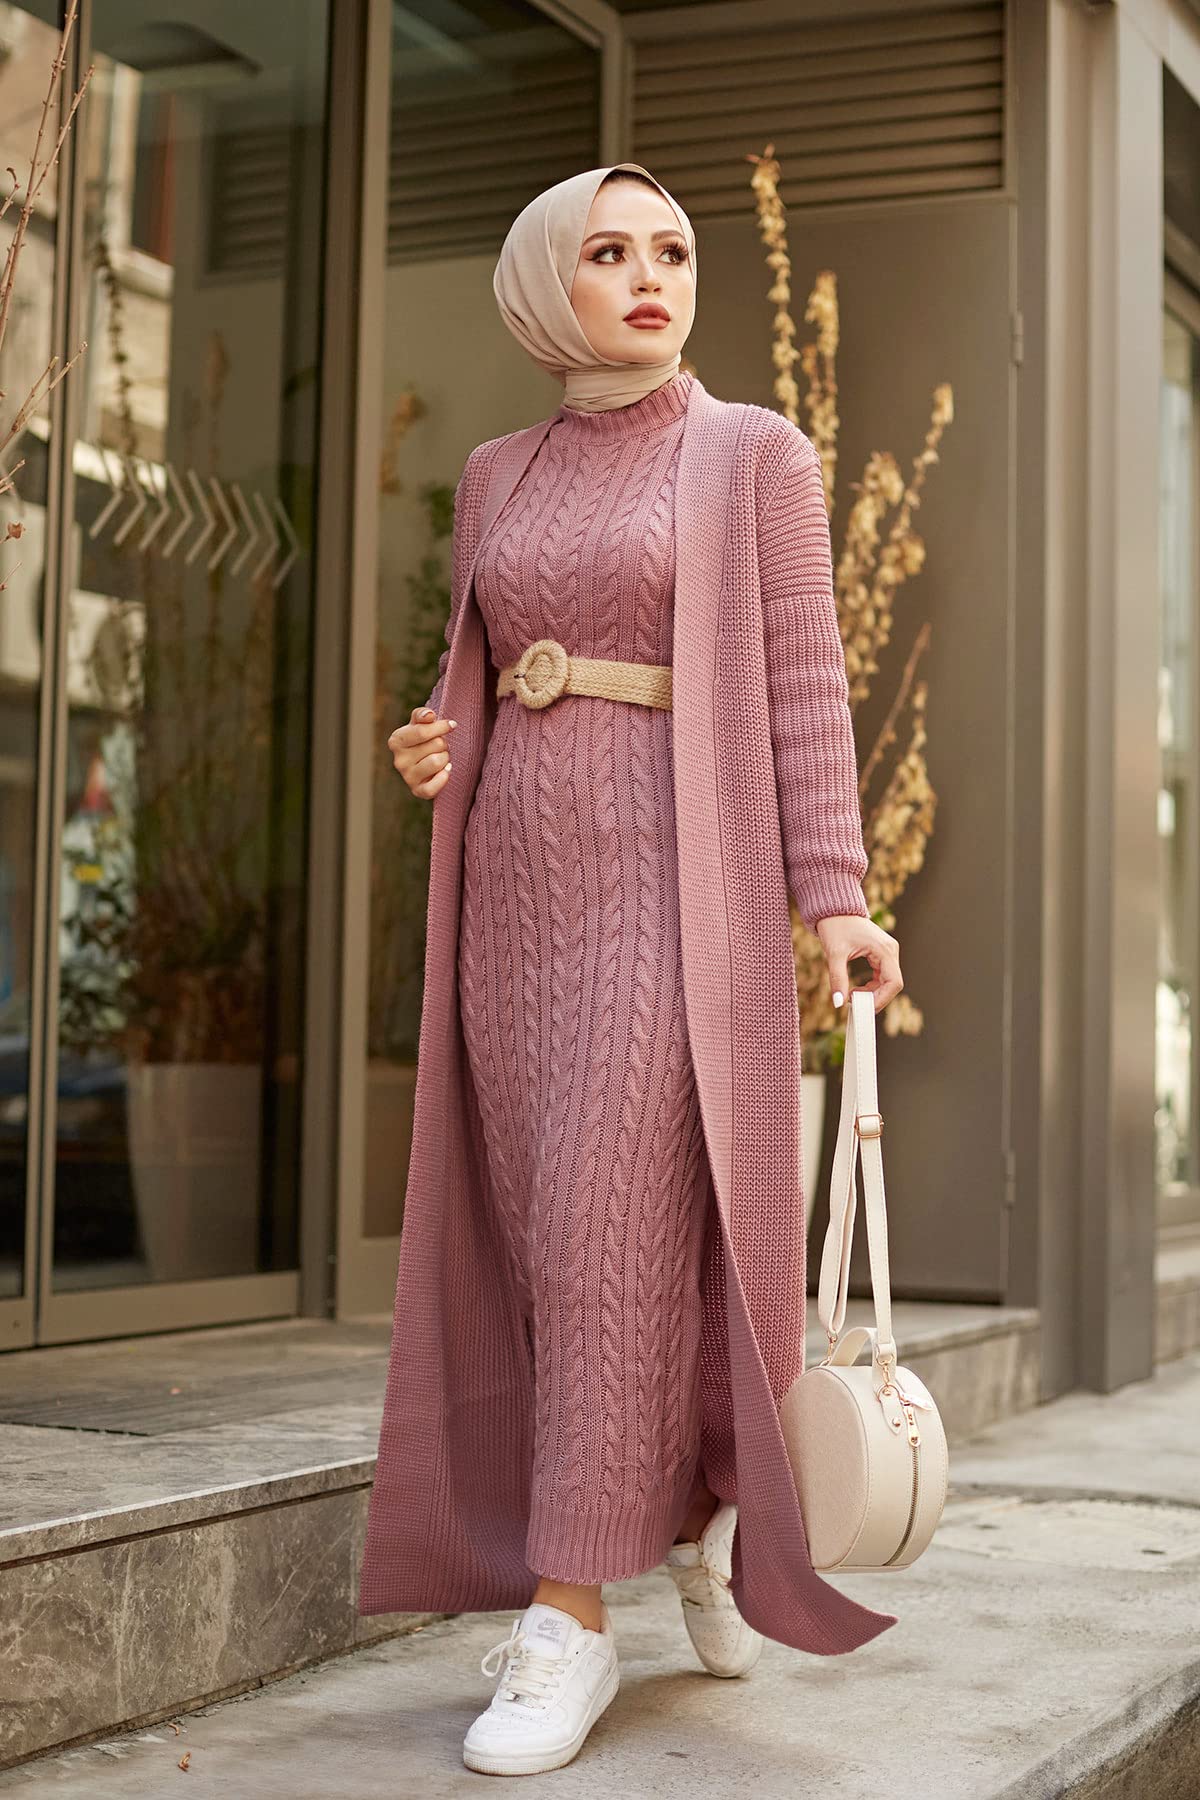 istanbulstyles Autumn Winter 2 Piece Knitwear Suit and Belt Islamic Abaya Muslim Clothing Long Knitted Cardigan Suit